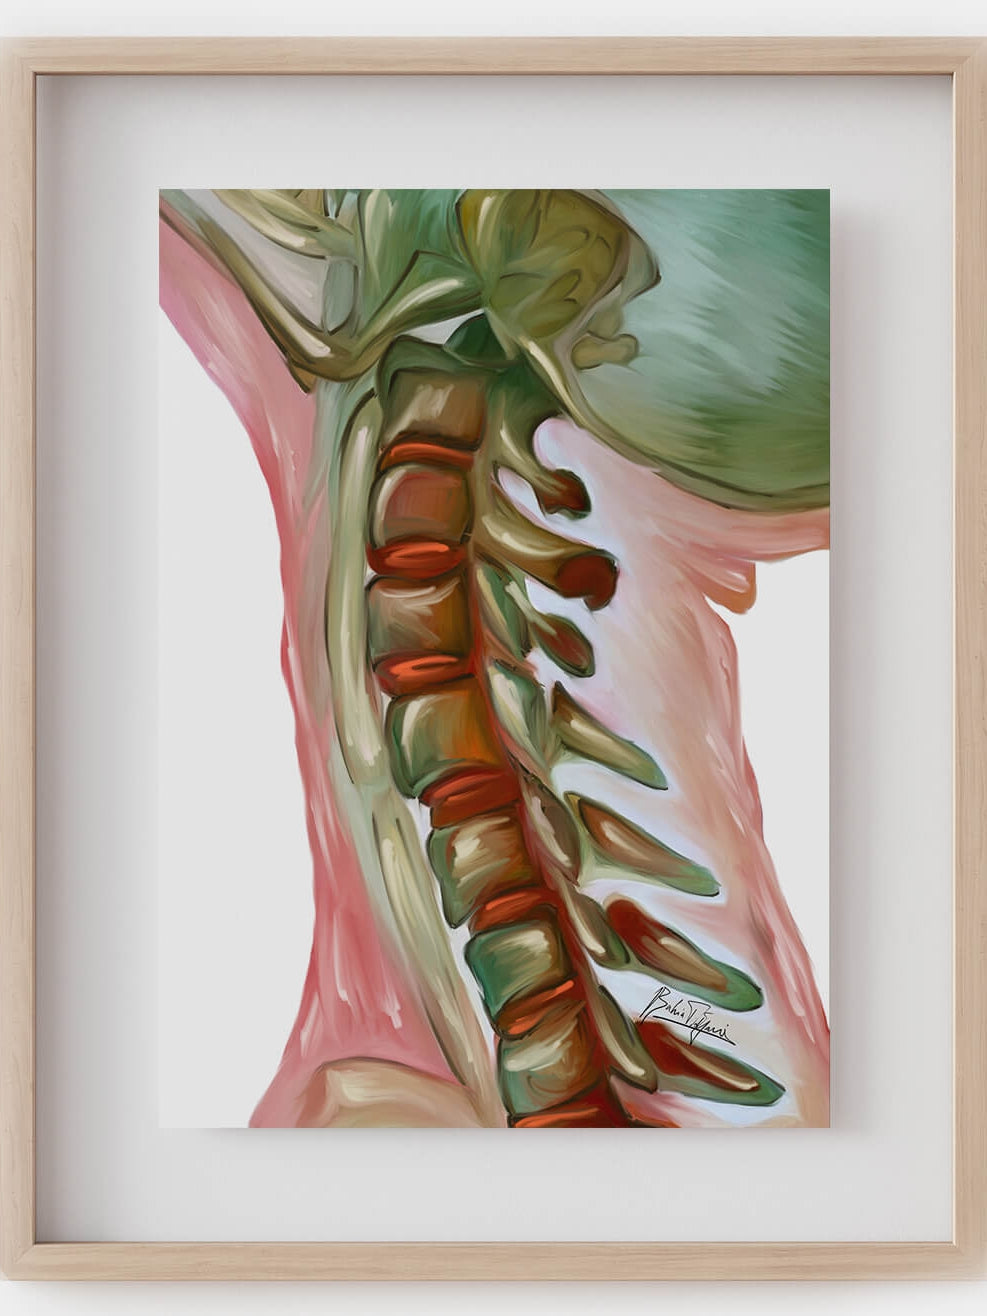 https://cdn.shopify.com/s/files/1/0570/9548/7684/products/spine-anatomy-painting_987x.jpg?v=1661778833